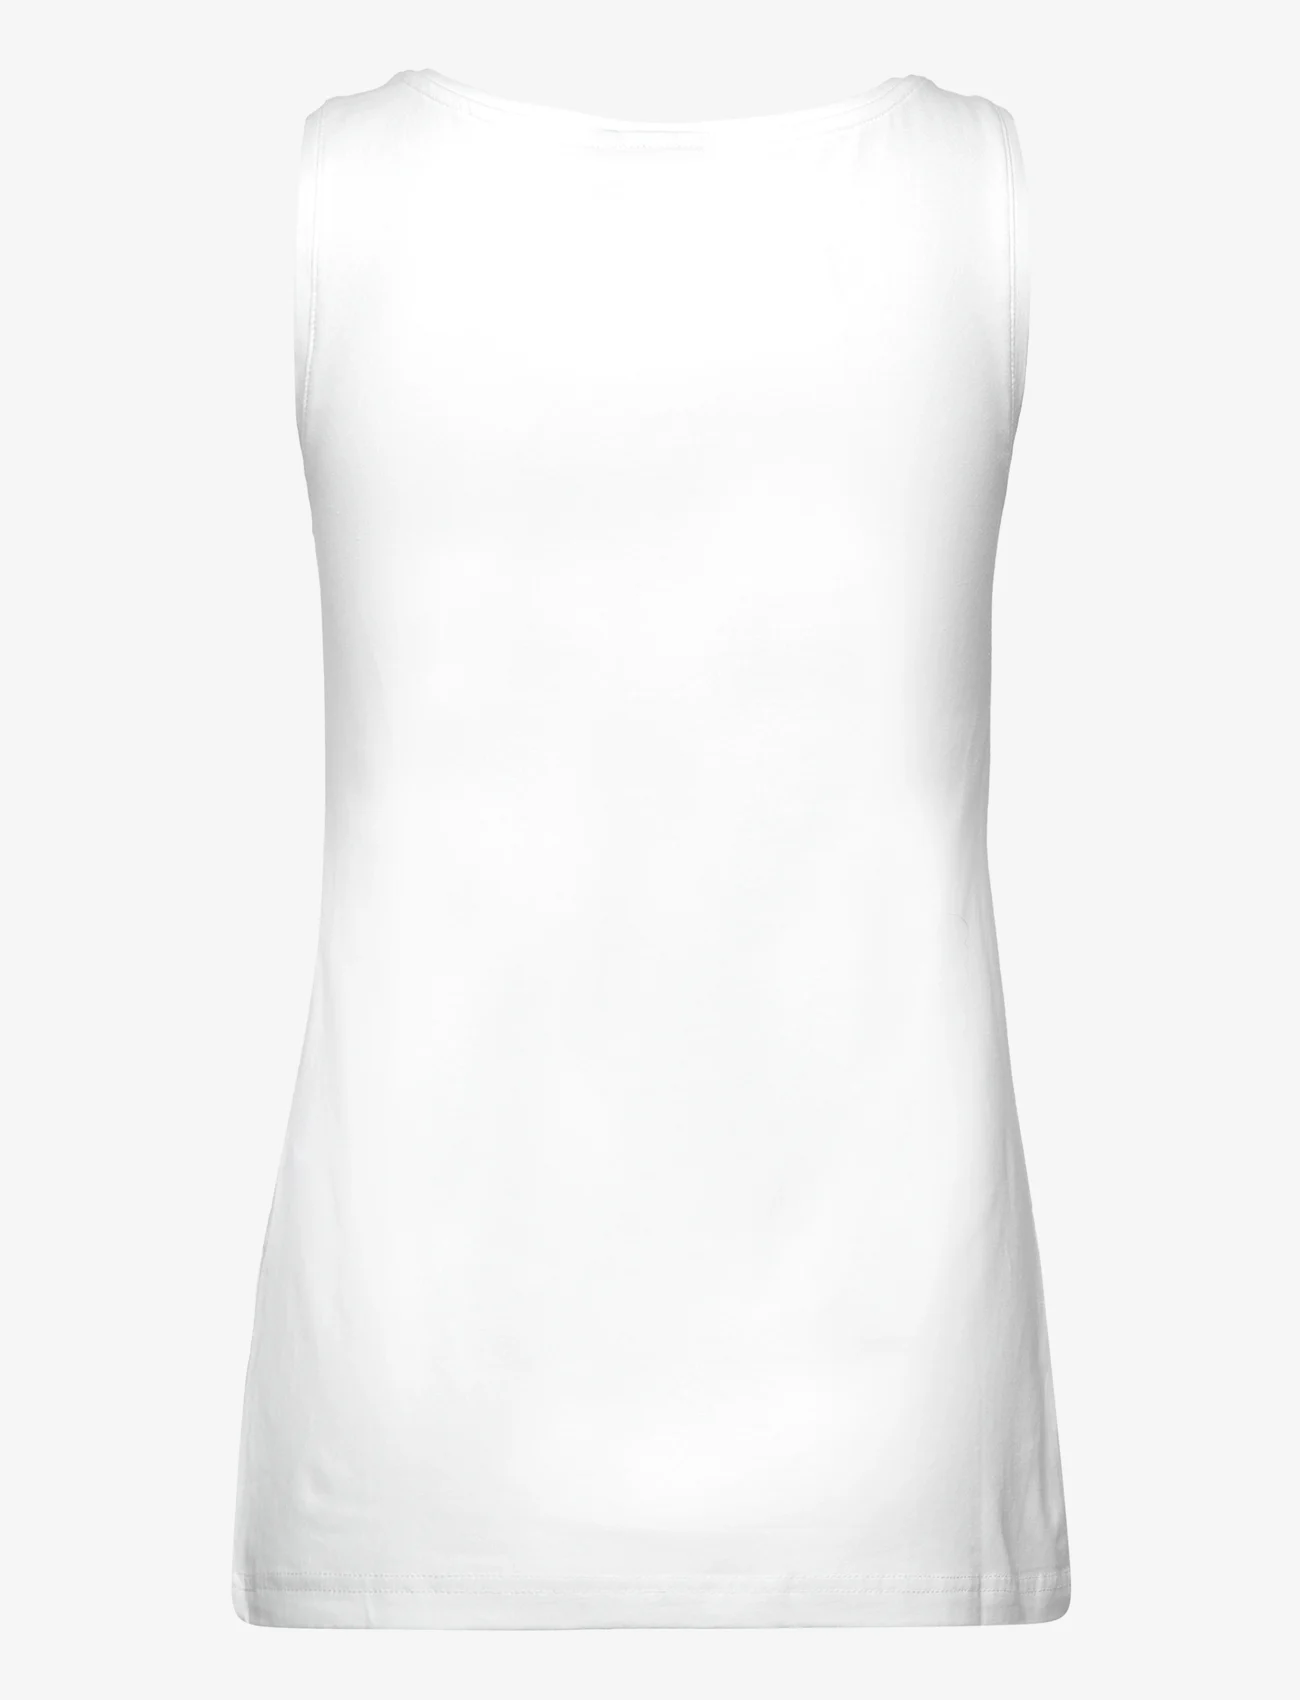 Brandtex - Sleeveless-jersey - lowest prices - offwhite - 1